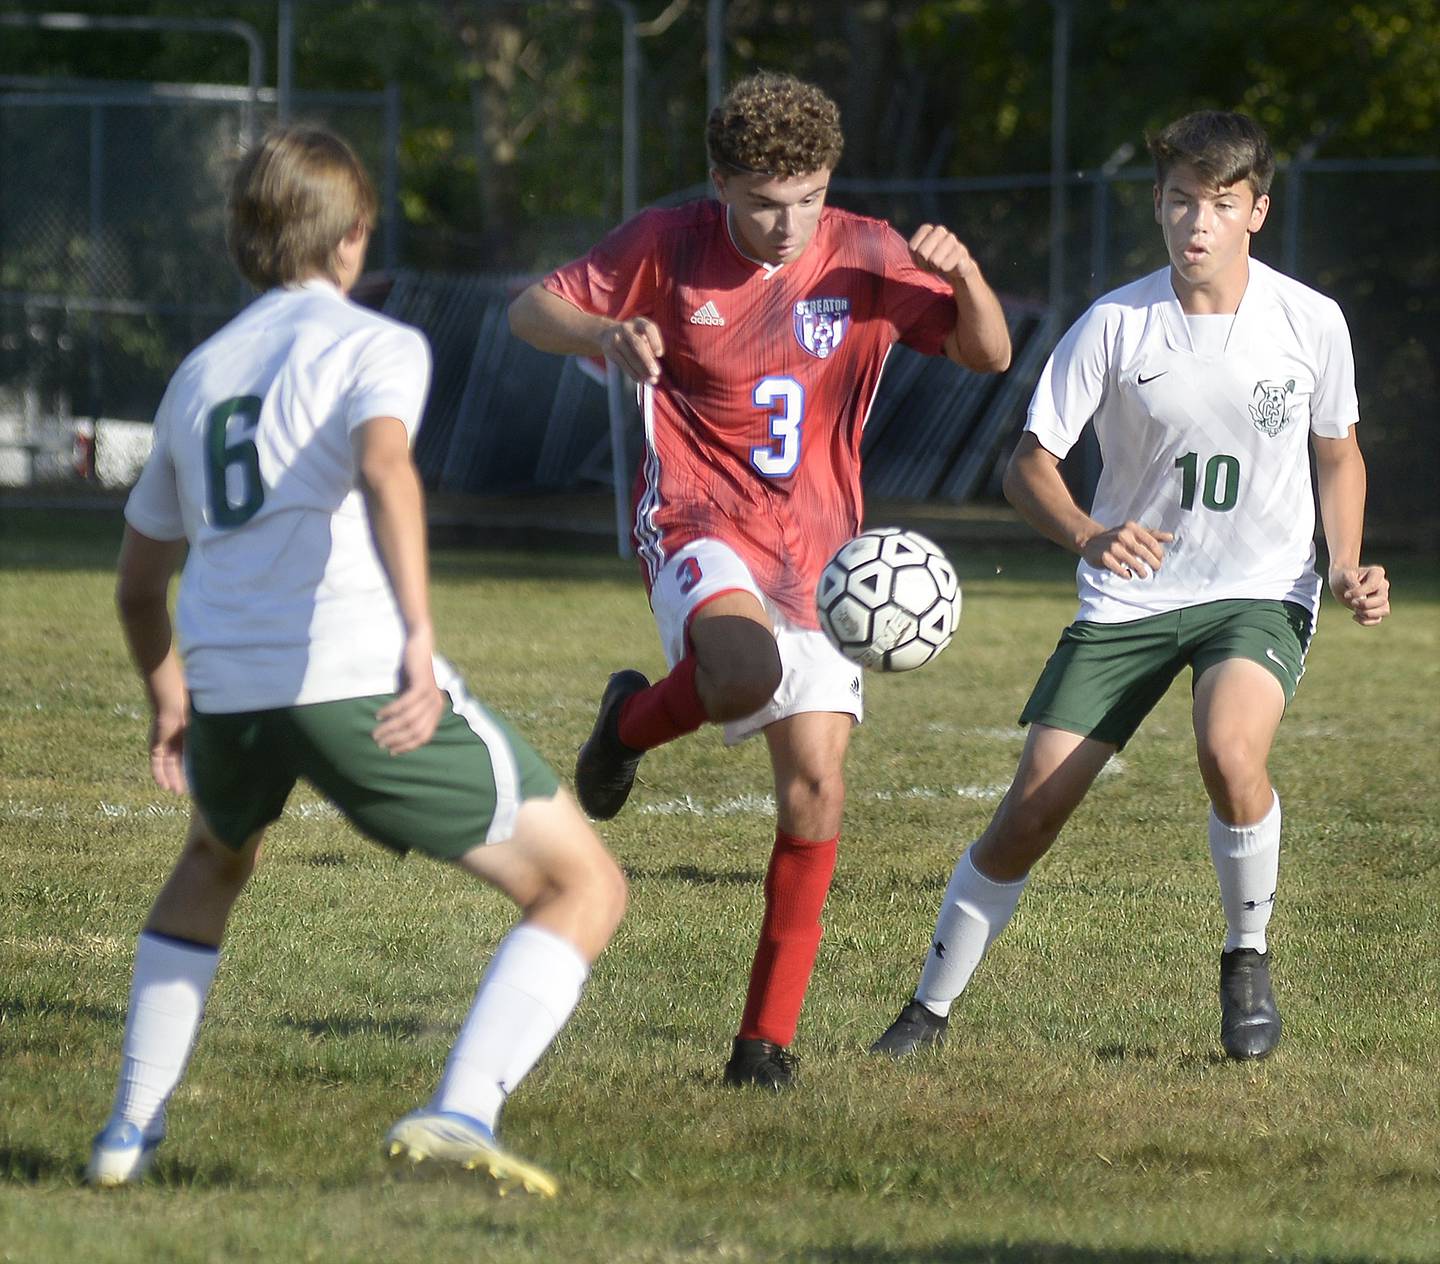 Streator’s Moe Bacon (3) splits the defense of Coal City’s Chad Reinert (6) and Caleb Figueroa (10) during first half of a match Tuesday, Oct. 4, 2022 at Streator.